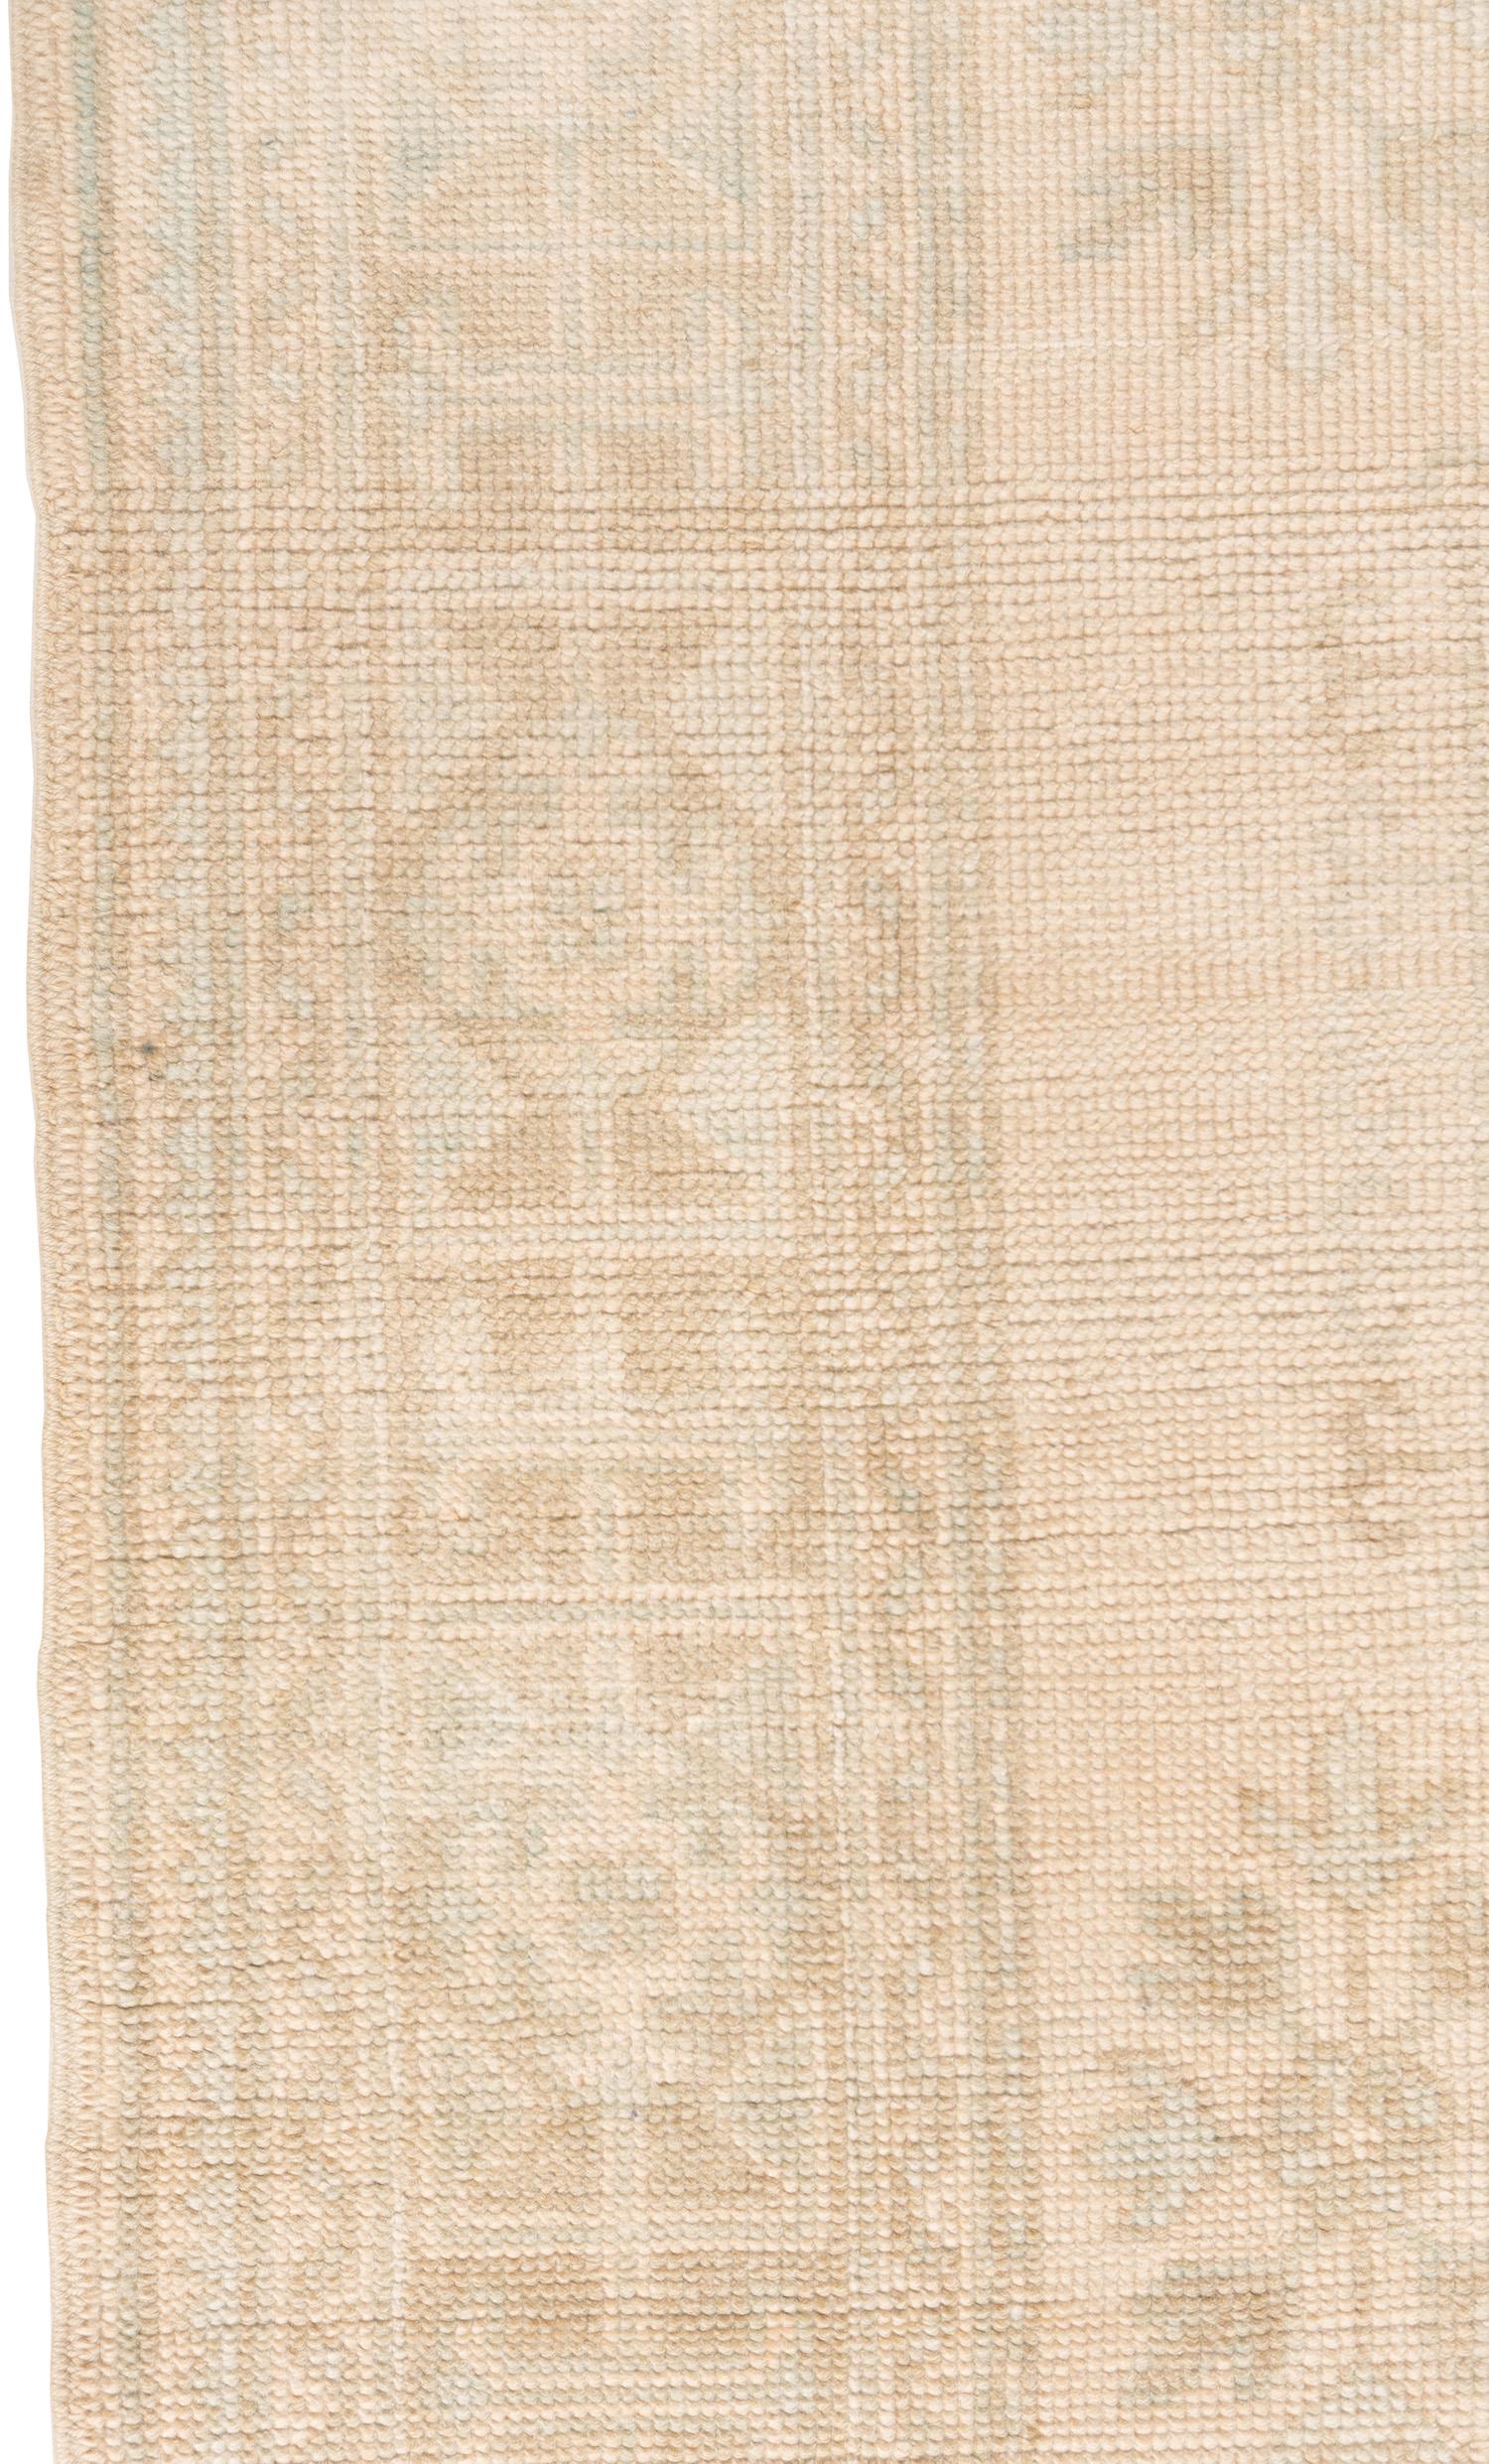 Vintage Subdued Turkish Oushak Runner 4'7 X 11'3 In Good Condition For Sale In New York, NY